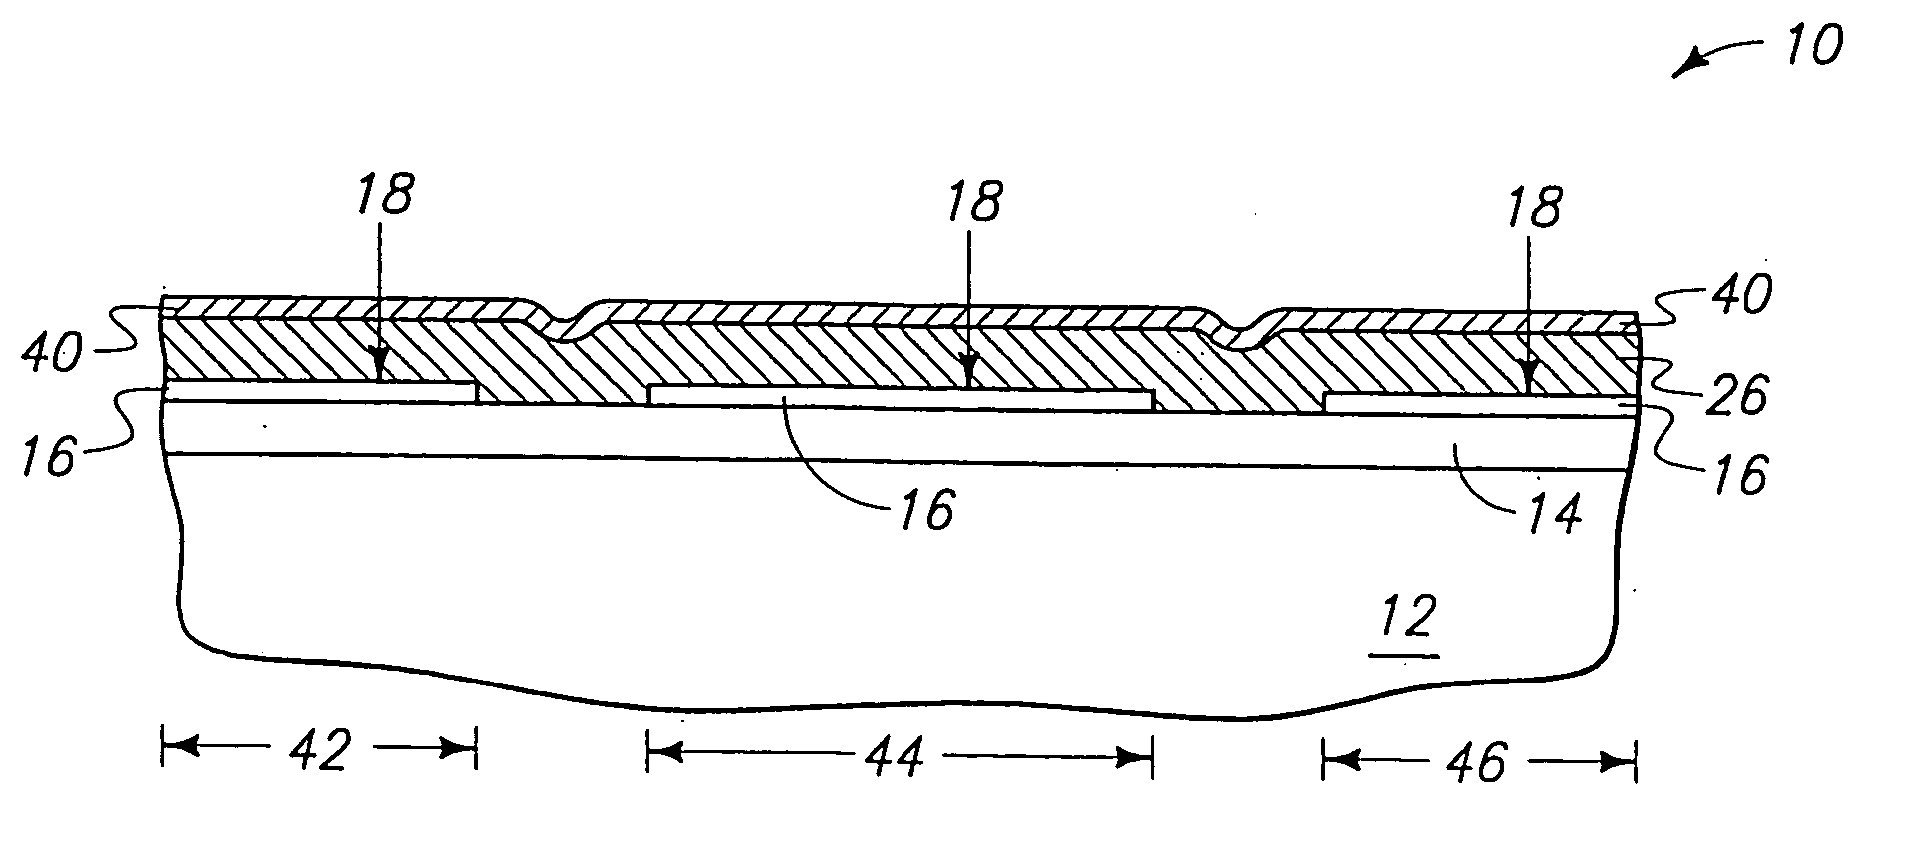 Methods of forming semiconductor constructions and integrated circuits